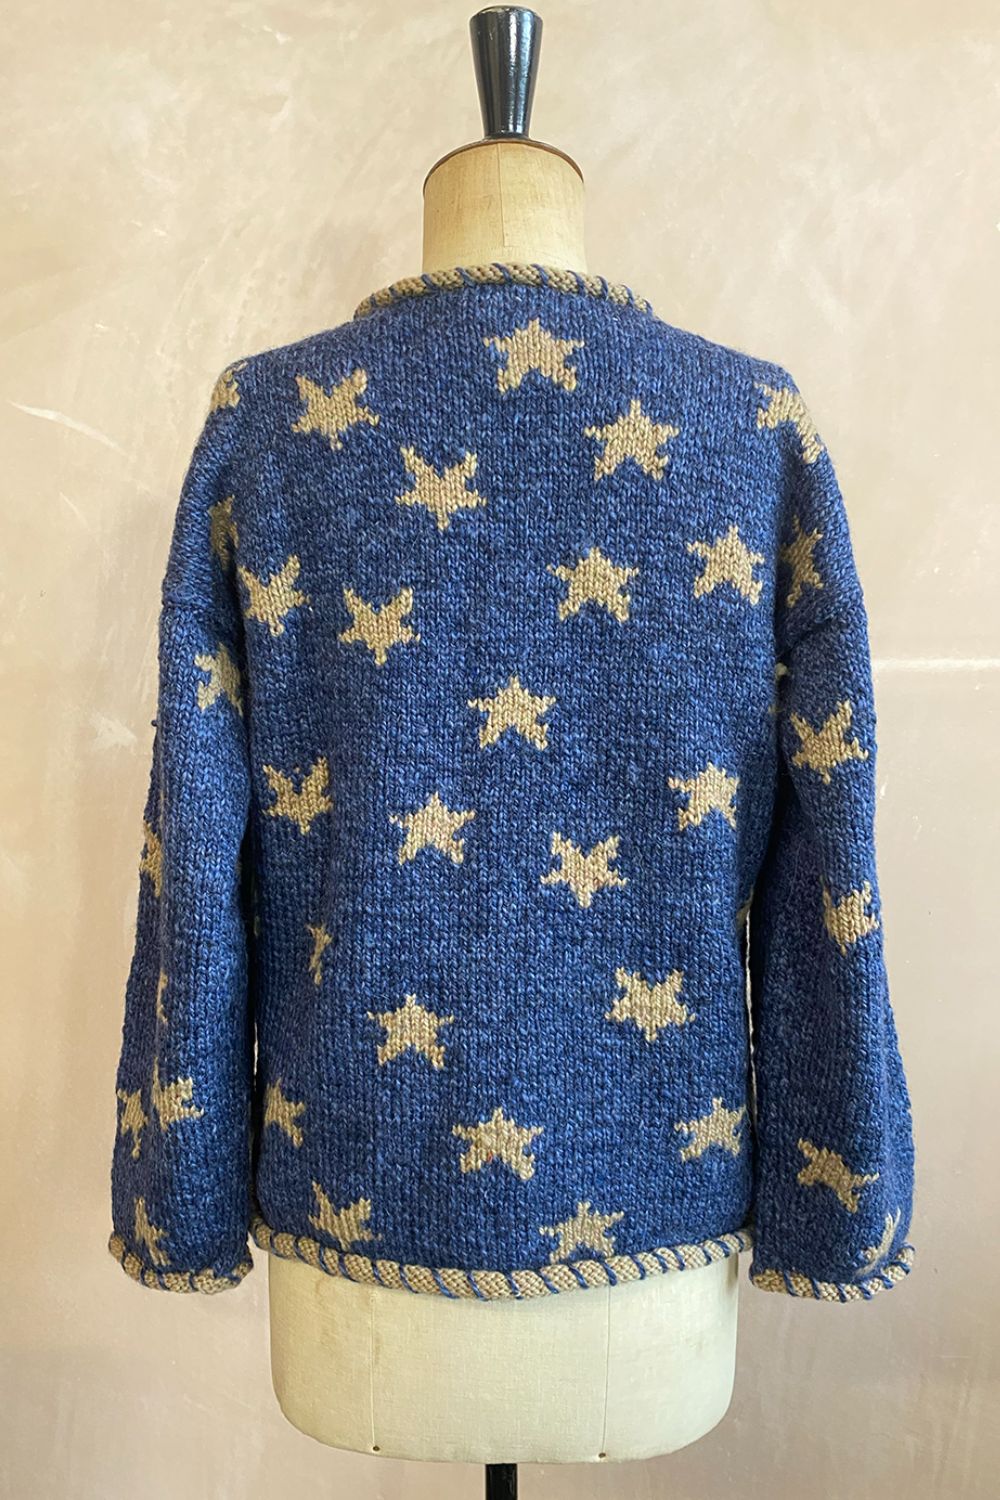 Back of Star Cardigan showing gold stars on blue background